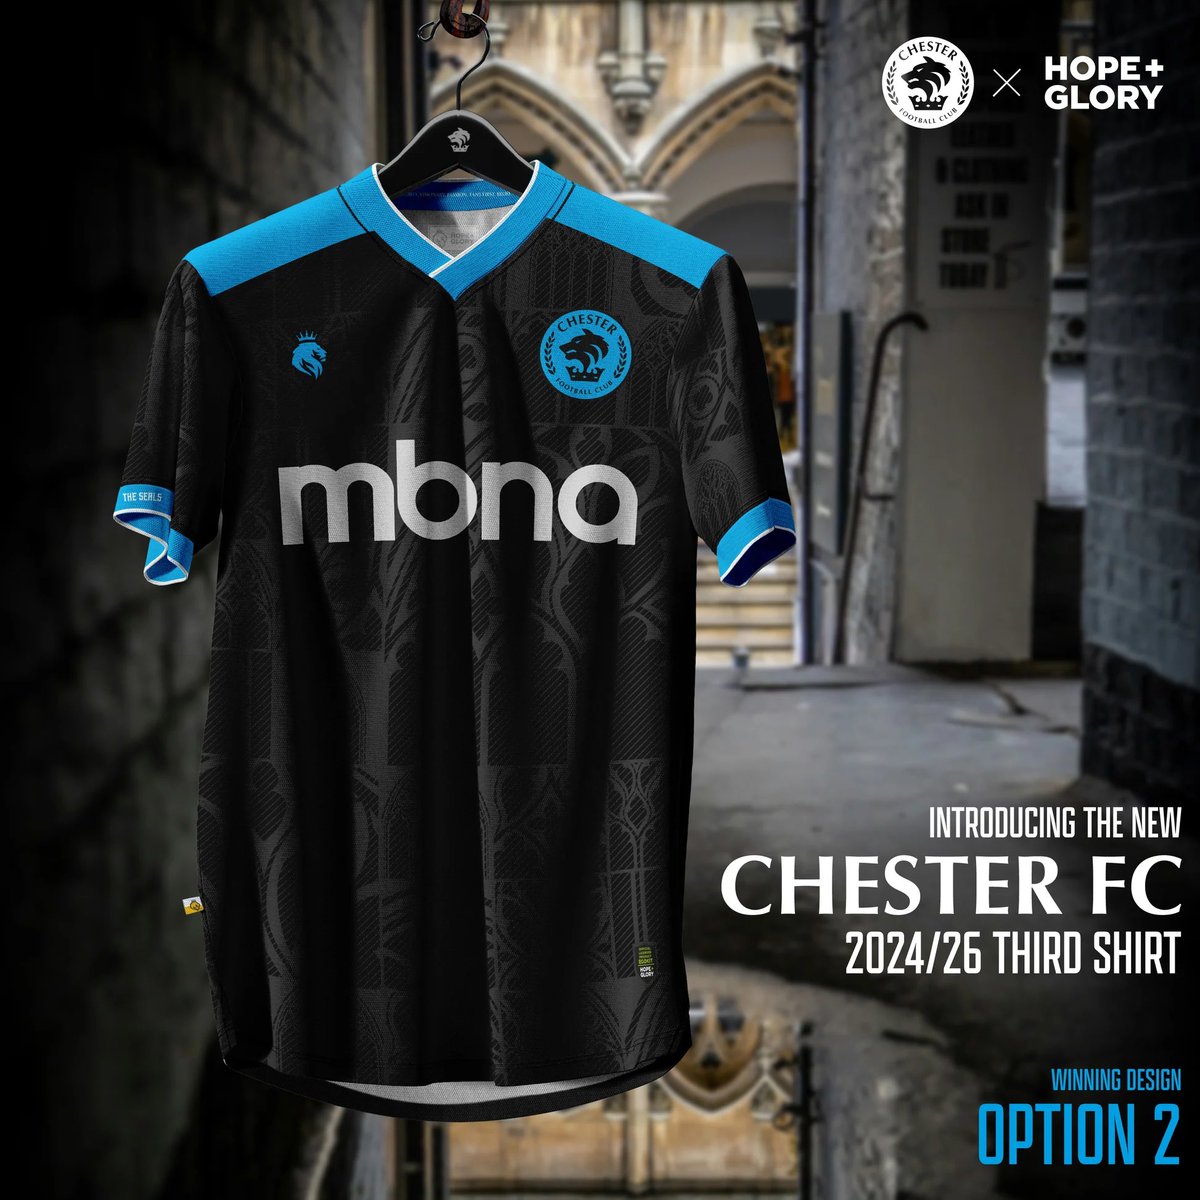 ⚫️🔵 That’s my new @ChesterFC third shirt ordered in preparation for the new season! This is the shirt I voted for, as the black goes really well with the blue. It’s a nice change, so I can’t wait to wear it on the terraces home and away next season - @chesterfcretail 🦭.